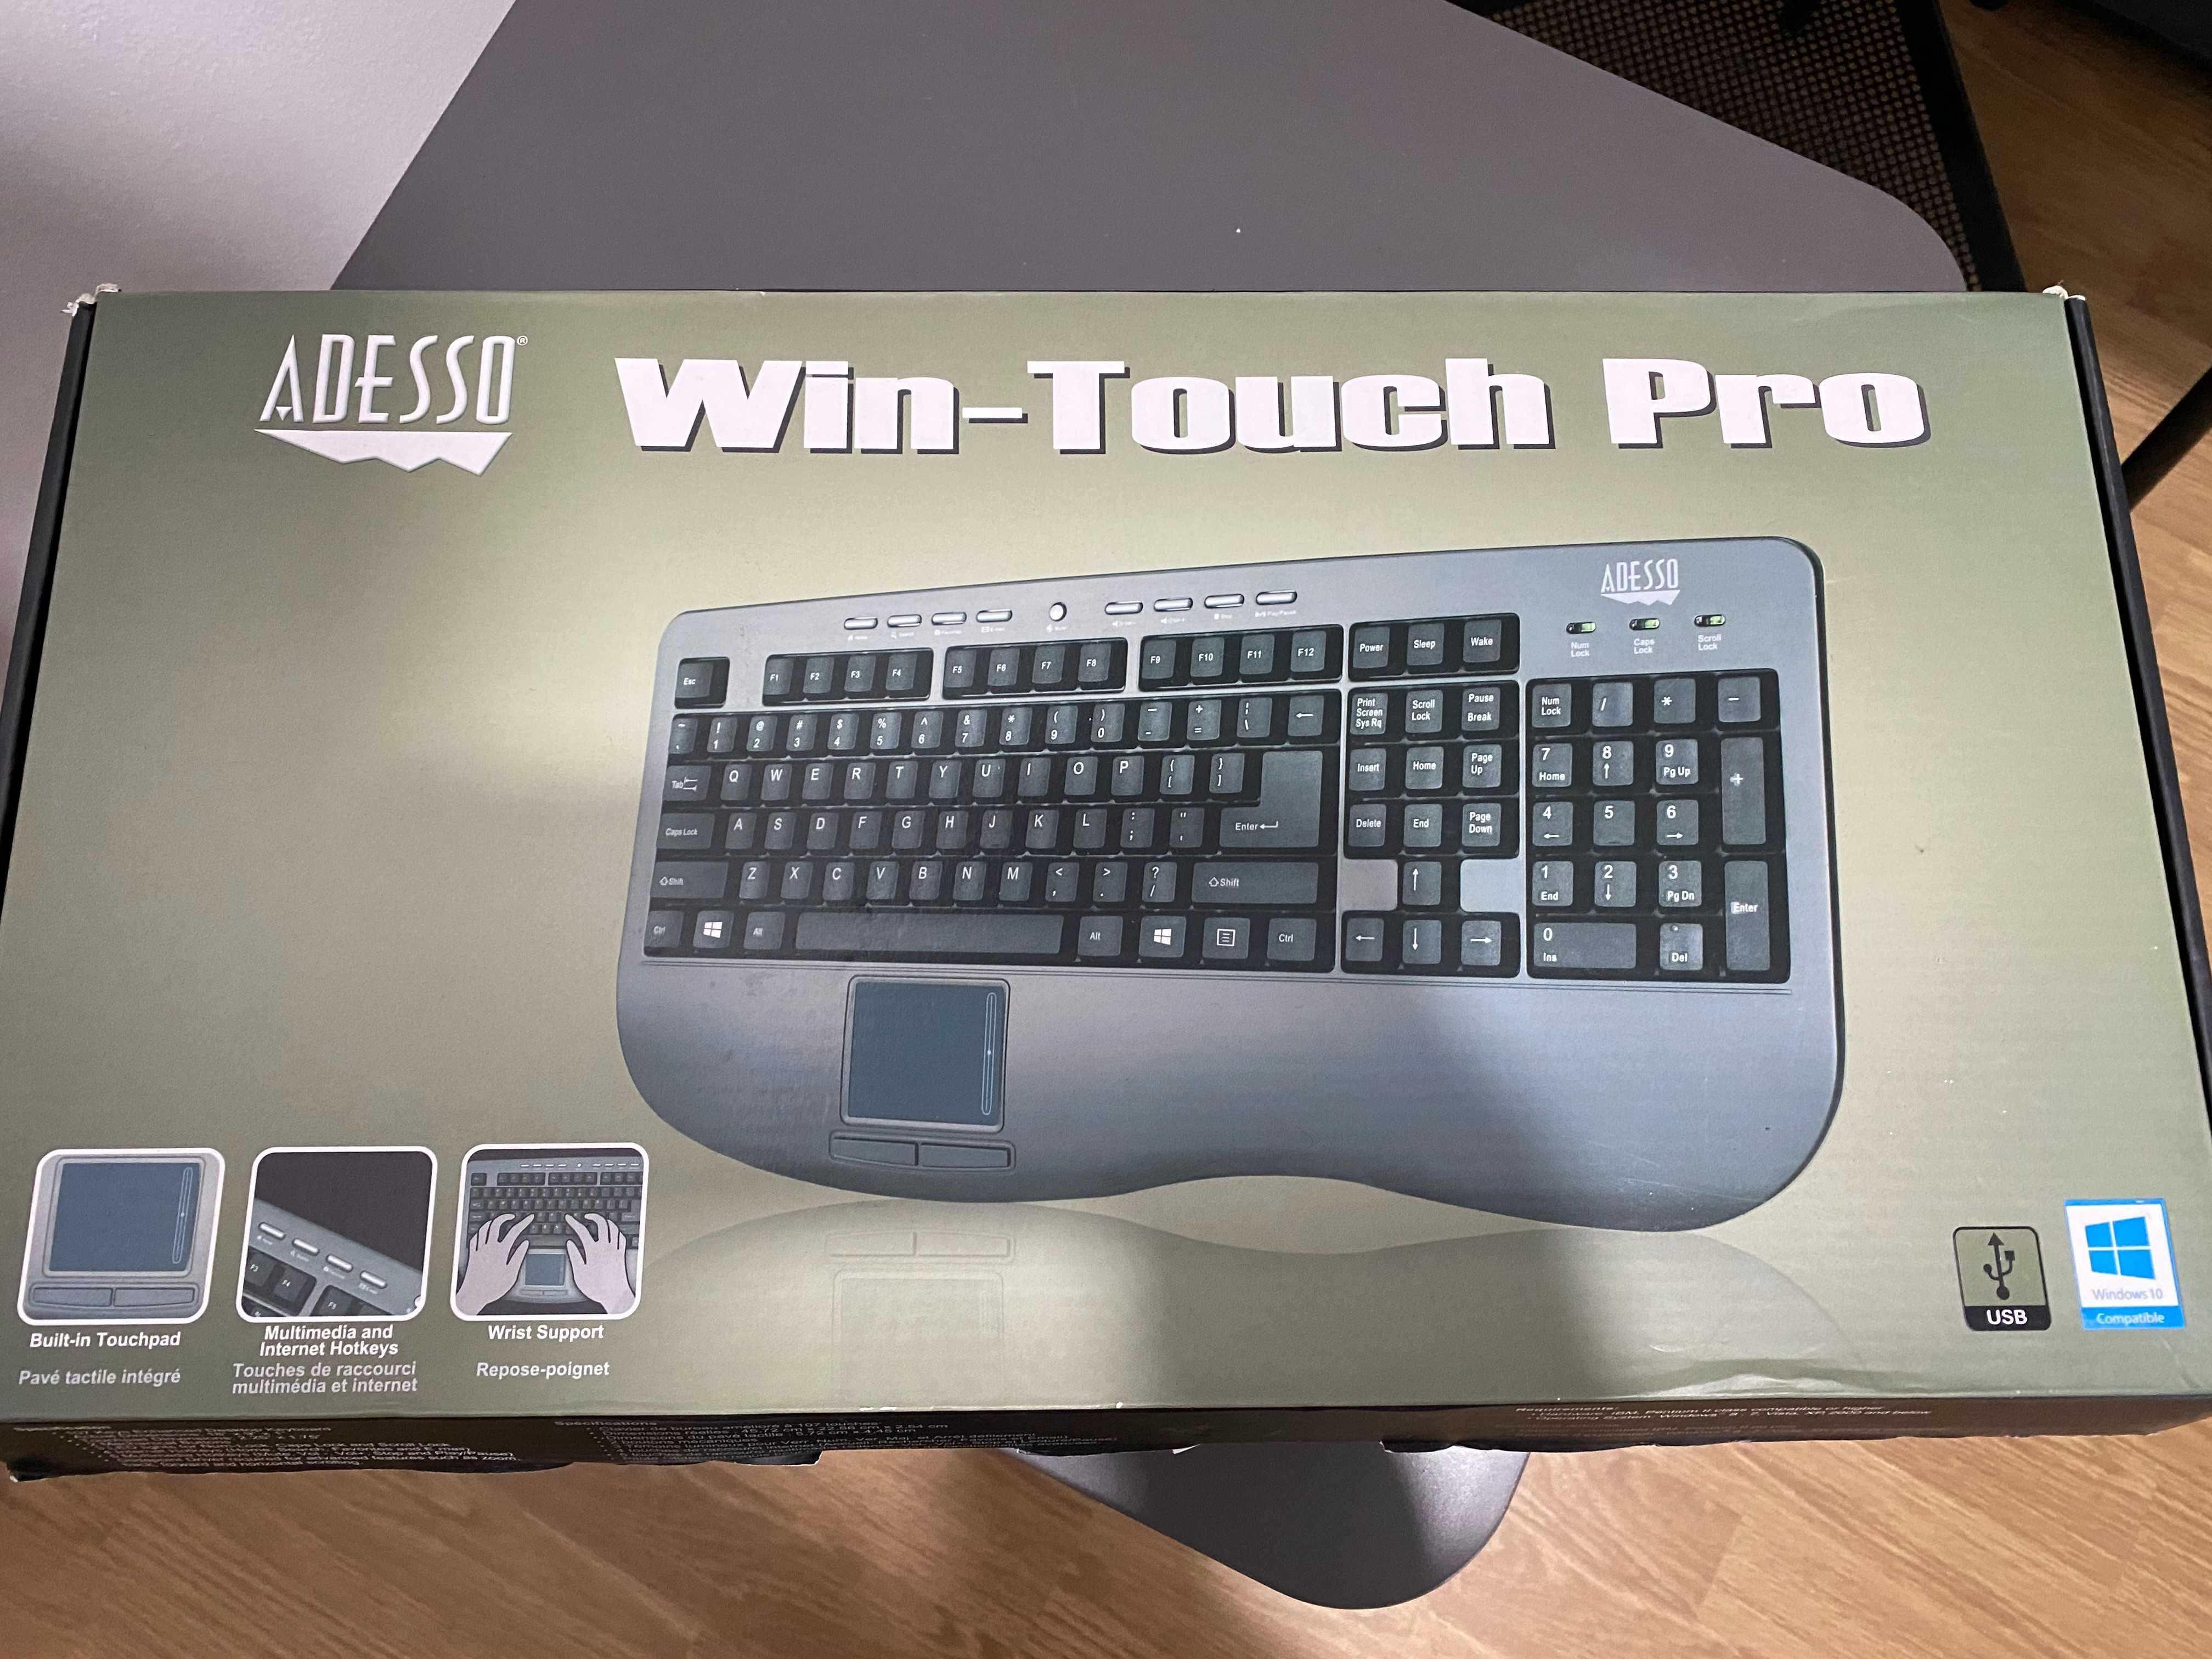 Teclado Adesso AKB-430UG Win-Touch Pro Desktop - Glidepoint Touchpad